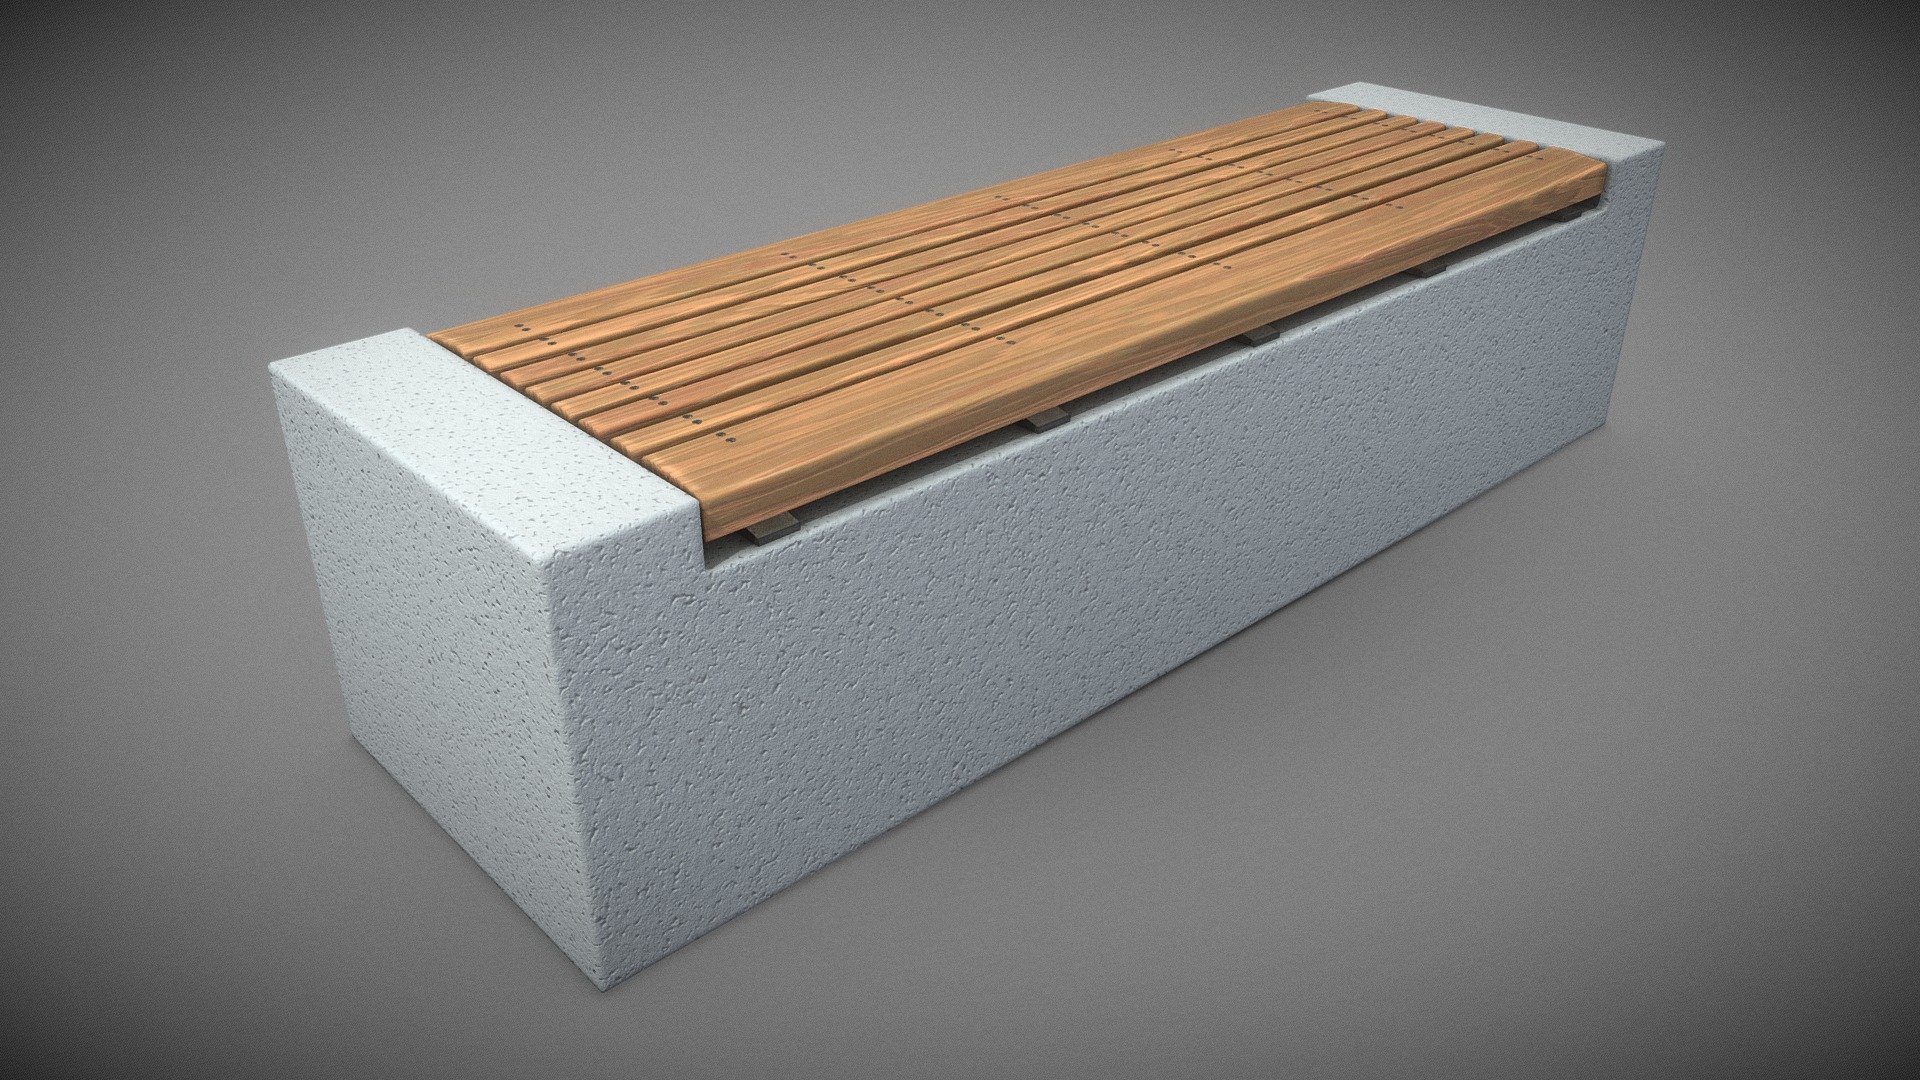 Bench [6] the wood on concrete block version 2. 




Bench [6] Wood on Concrete Block 1

Bench [6] Wood on Sandstone Block

Bench [6] Wood on Mosaic Stone Block



PBR texture maps: 




4096 x 4096 



Modeled and textured by 3DHaupt in Blender-2.82 - Bench [6] Wood on Concrete Block 2 - Buy Royalty Free 3D model by VIS-All-3D (@VIS-All) 3d model